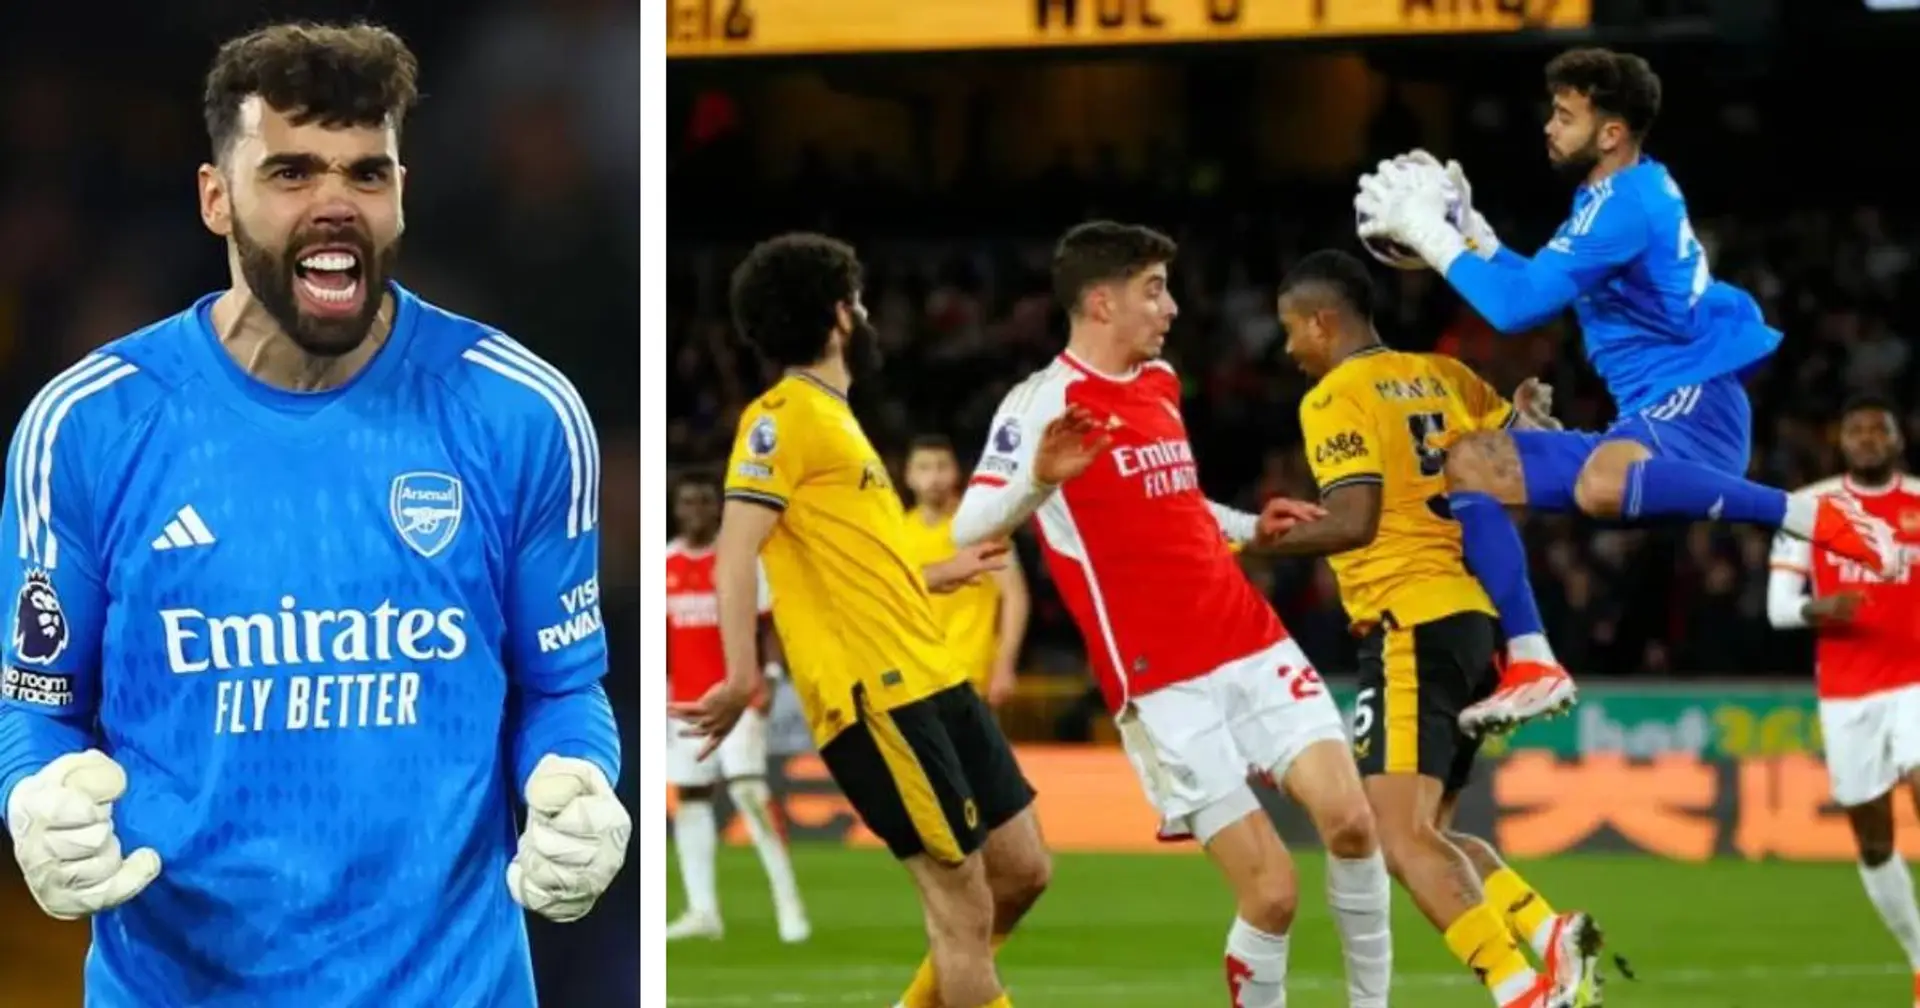 David Raya goes down in Arsenal history books for enviable clean sheet record